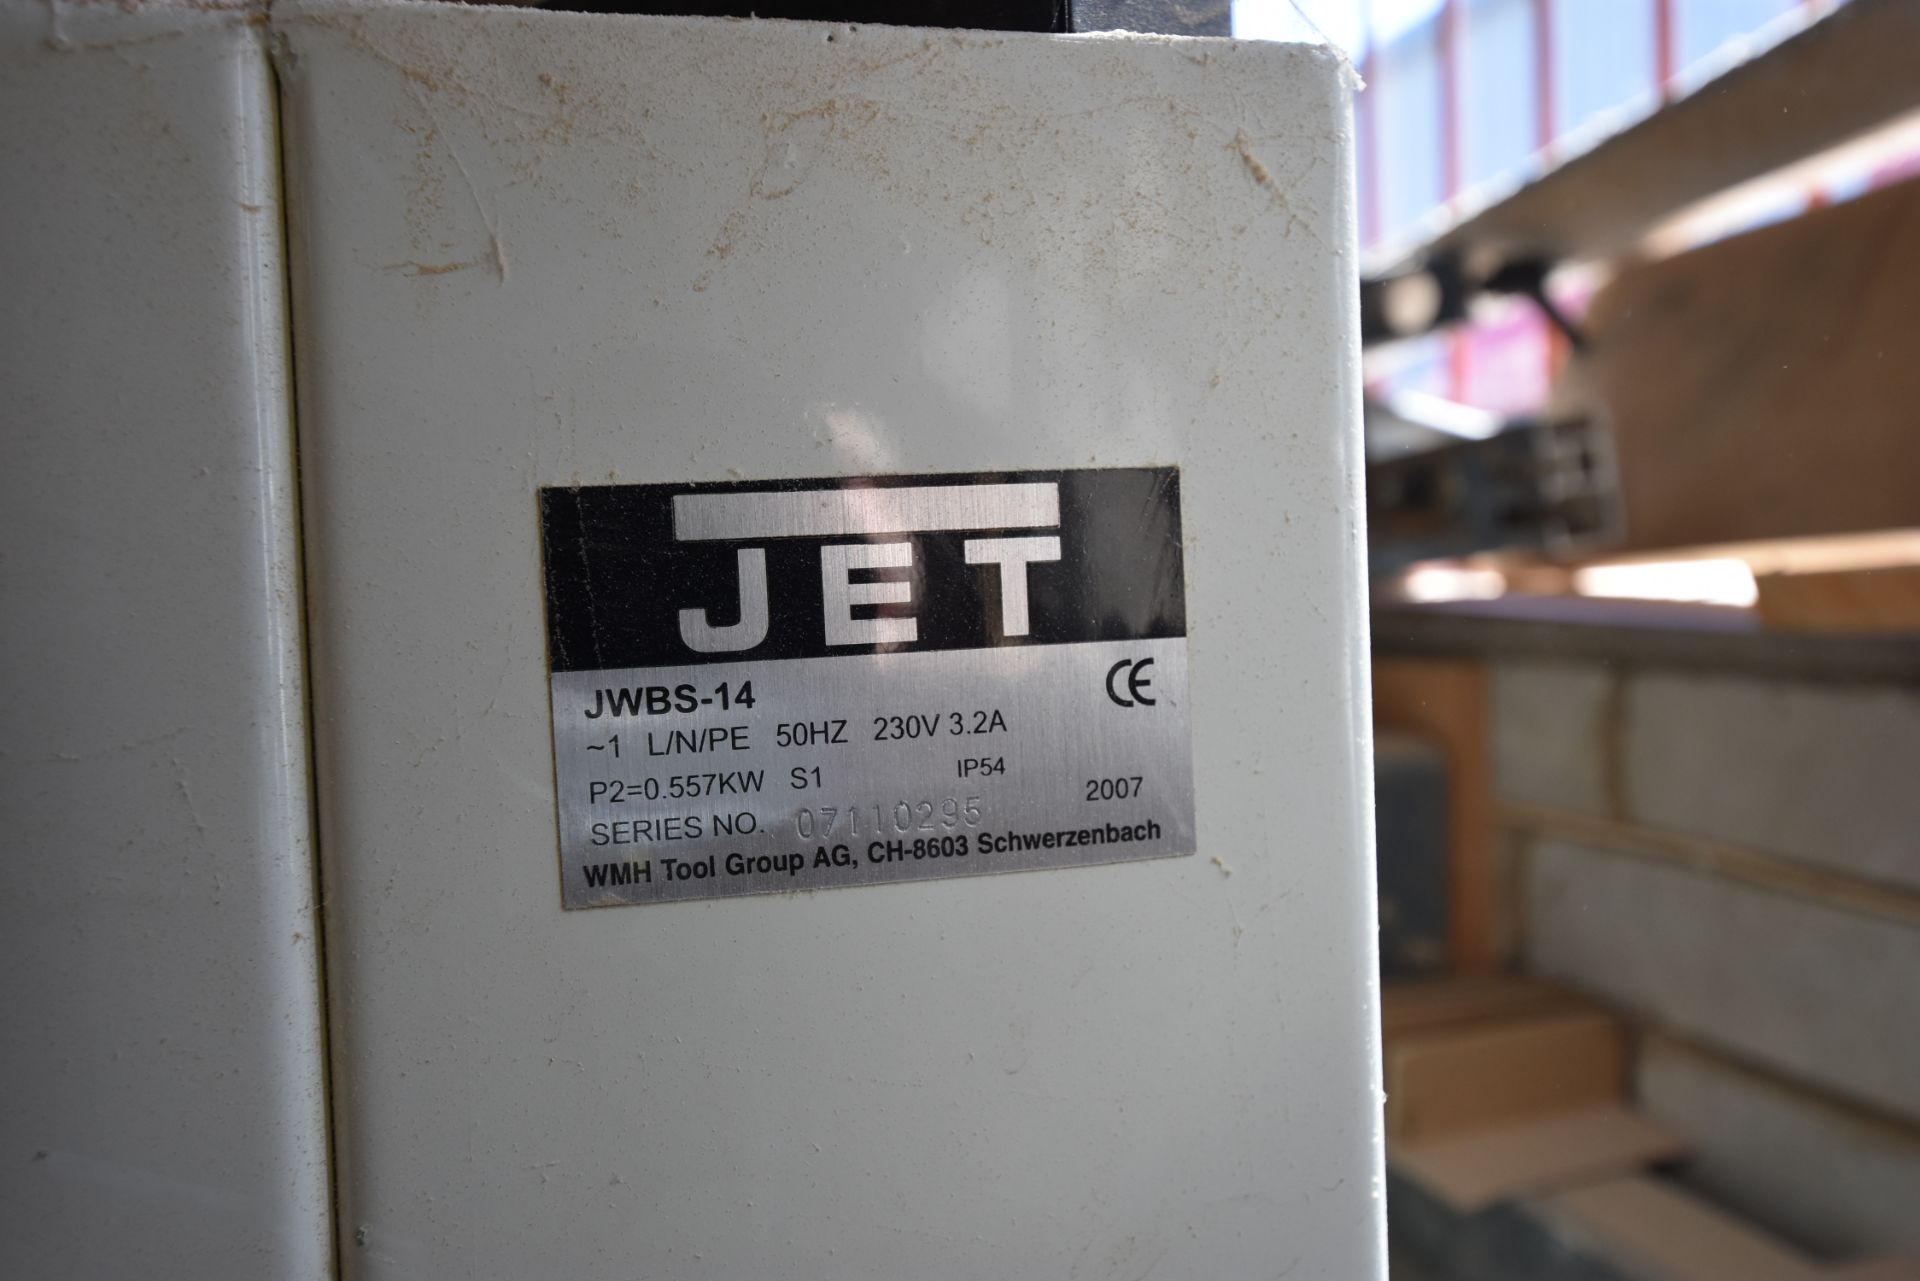 Jet JWBS-14 VERTICAL BANDSAW, serial no. 07110295, year of manufacture 2007, 230V, approx. 345mm - Image 3 of 3